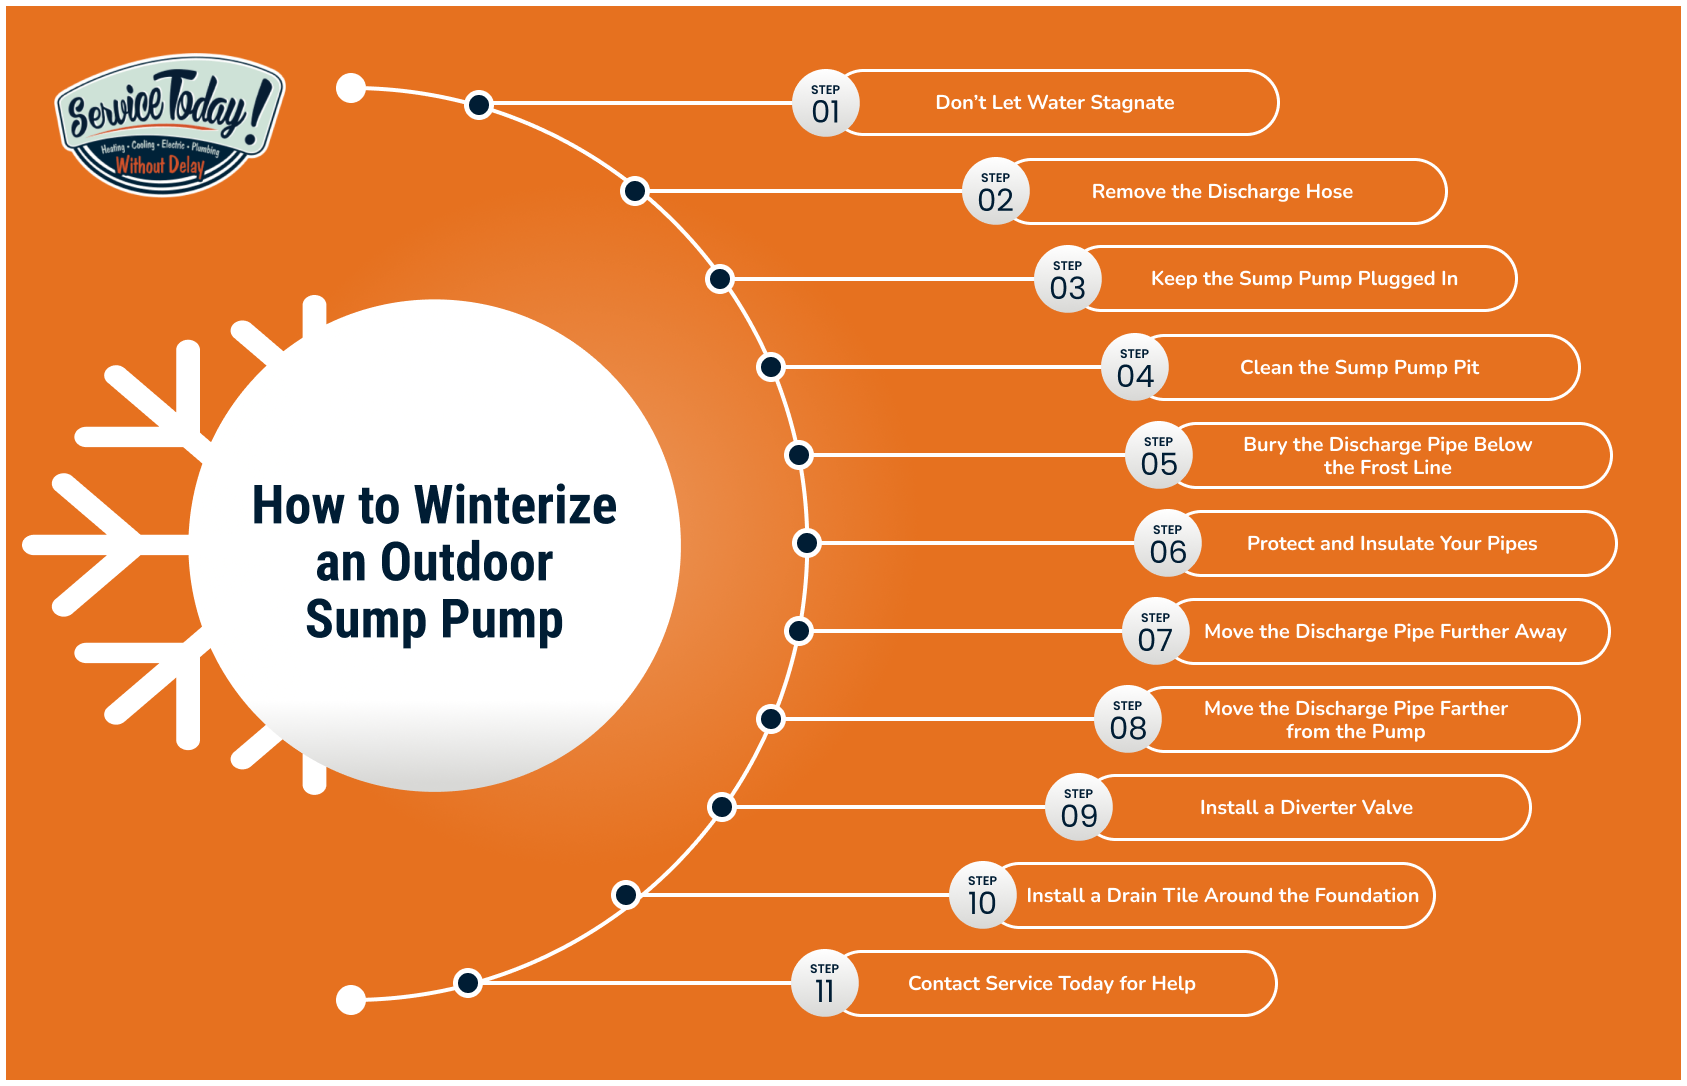 How to winterize outdoor sump pump